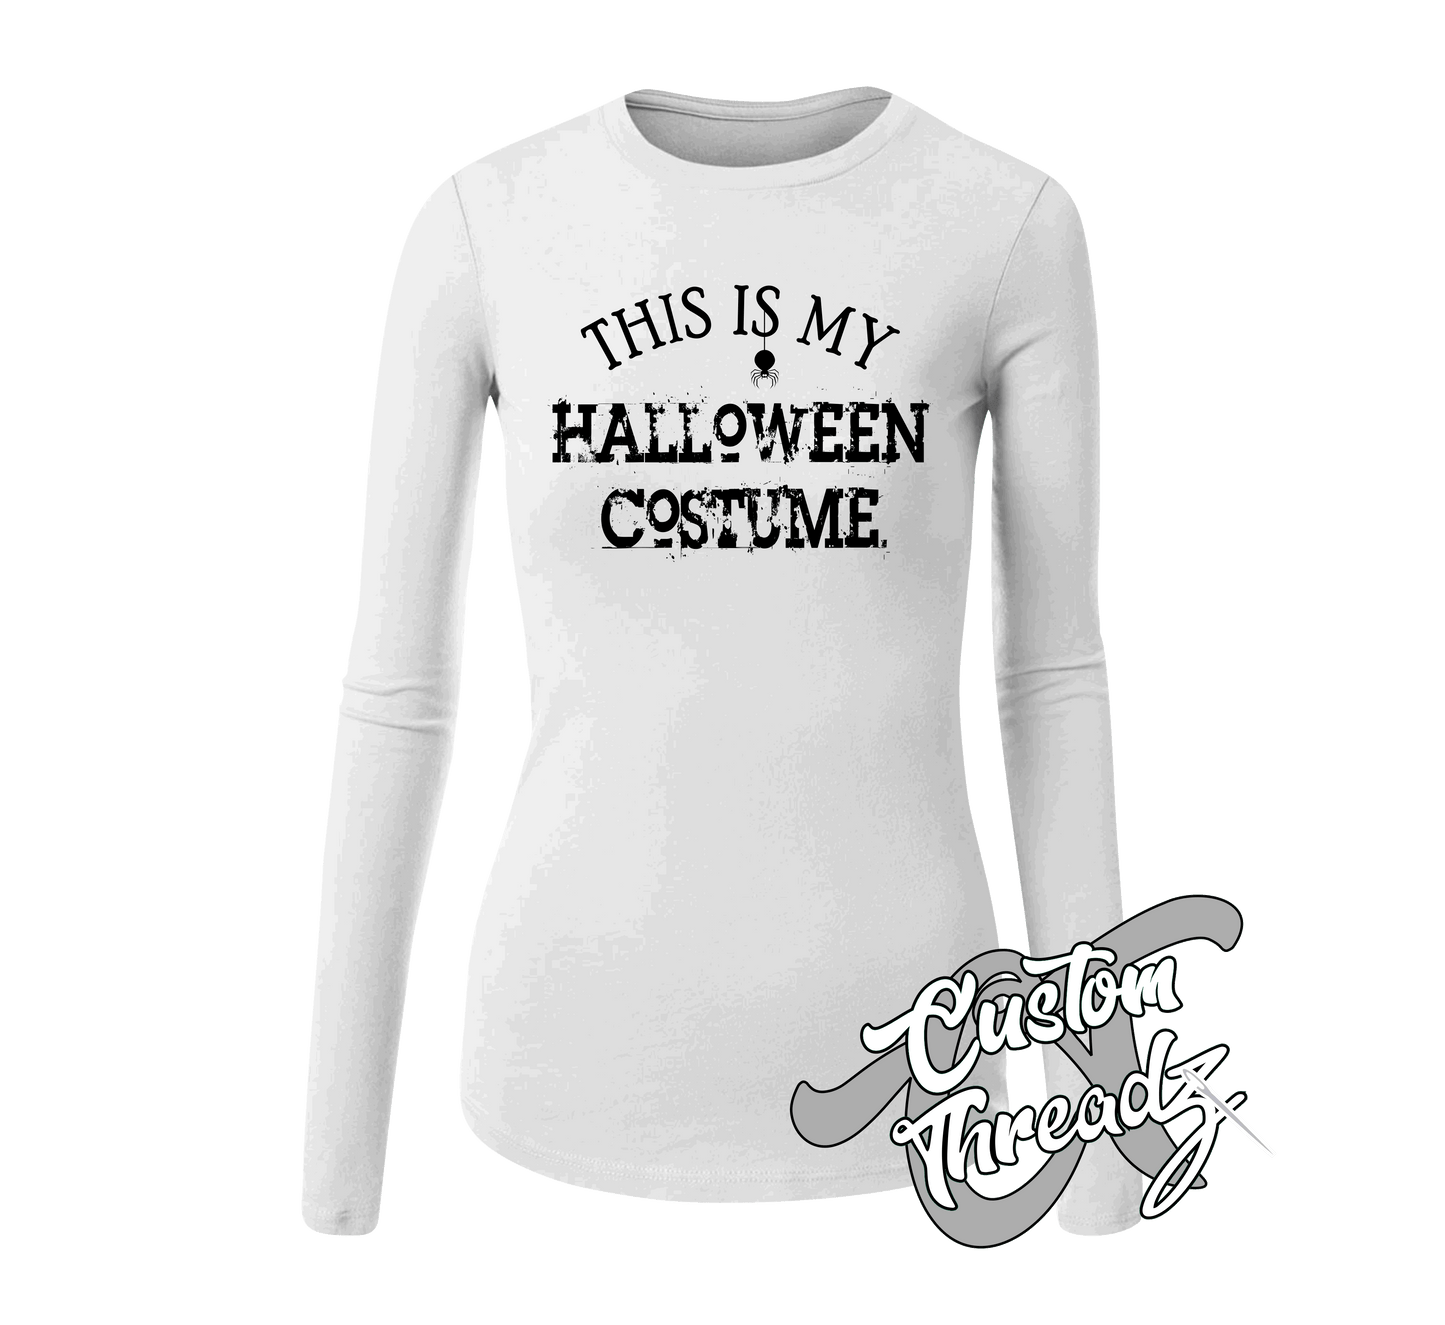 white womens long sleeve tee with this is my halloween costume DTG printed design